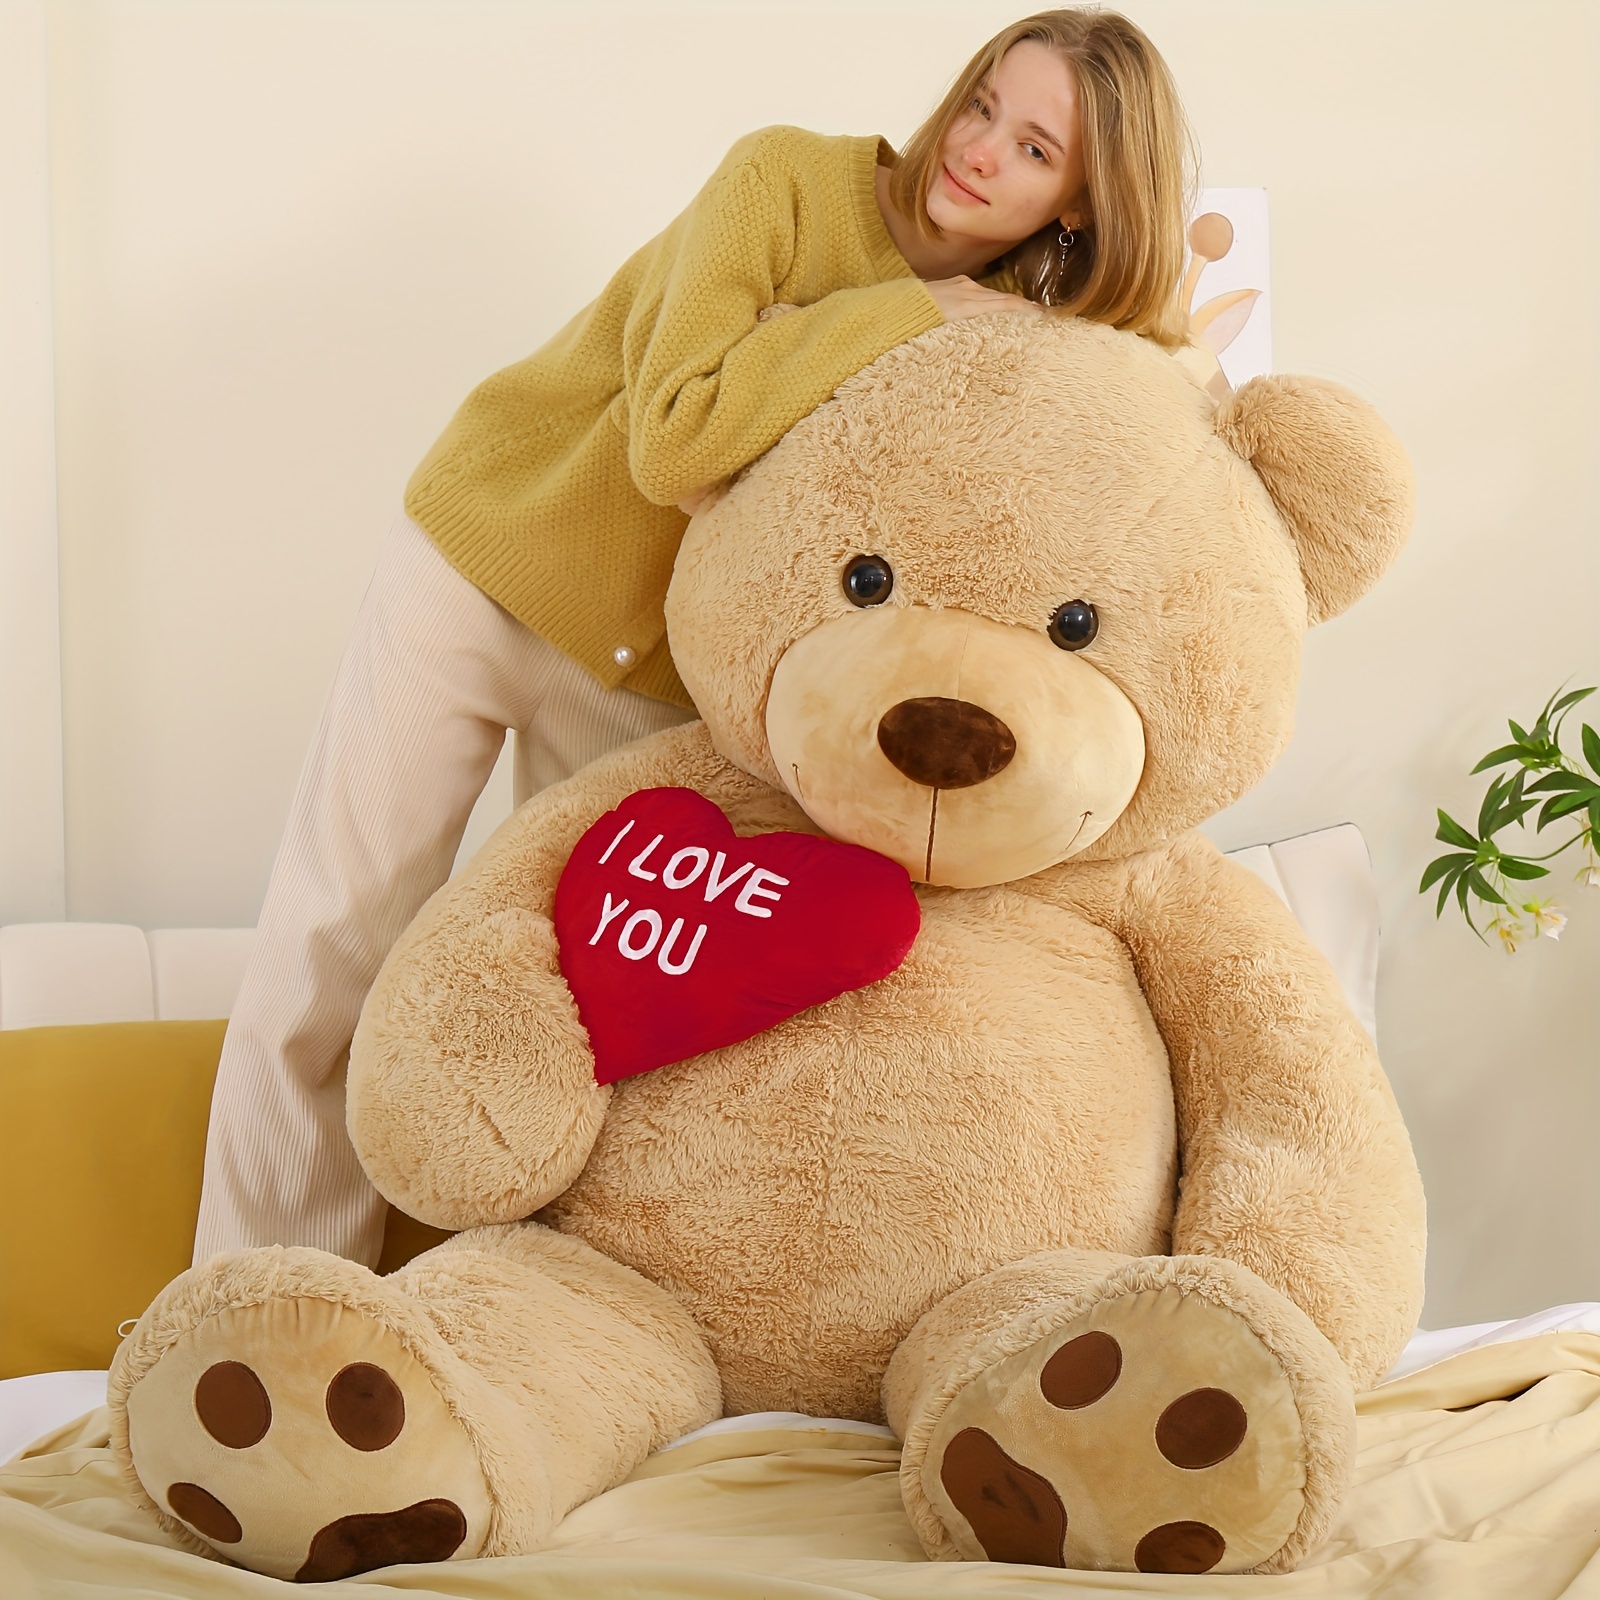 

Giant I Love You Teddy Bear 6ft With Heart, 183cm Large Plush Bear Stuffed Animal Soft Cuddly Toy Big, Birthday Gifts For Women Mother's Day Decorations (light Brown)